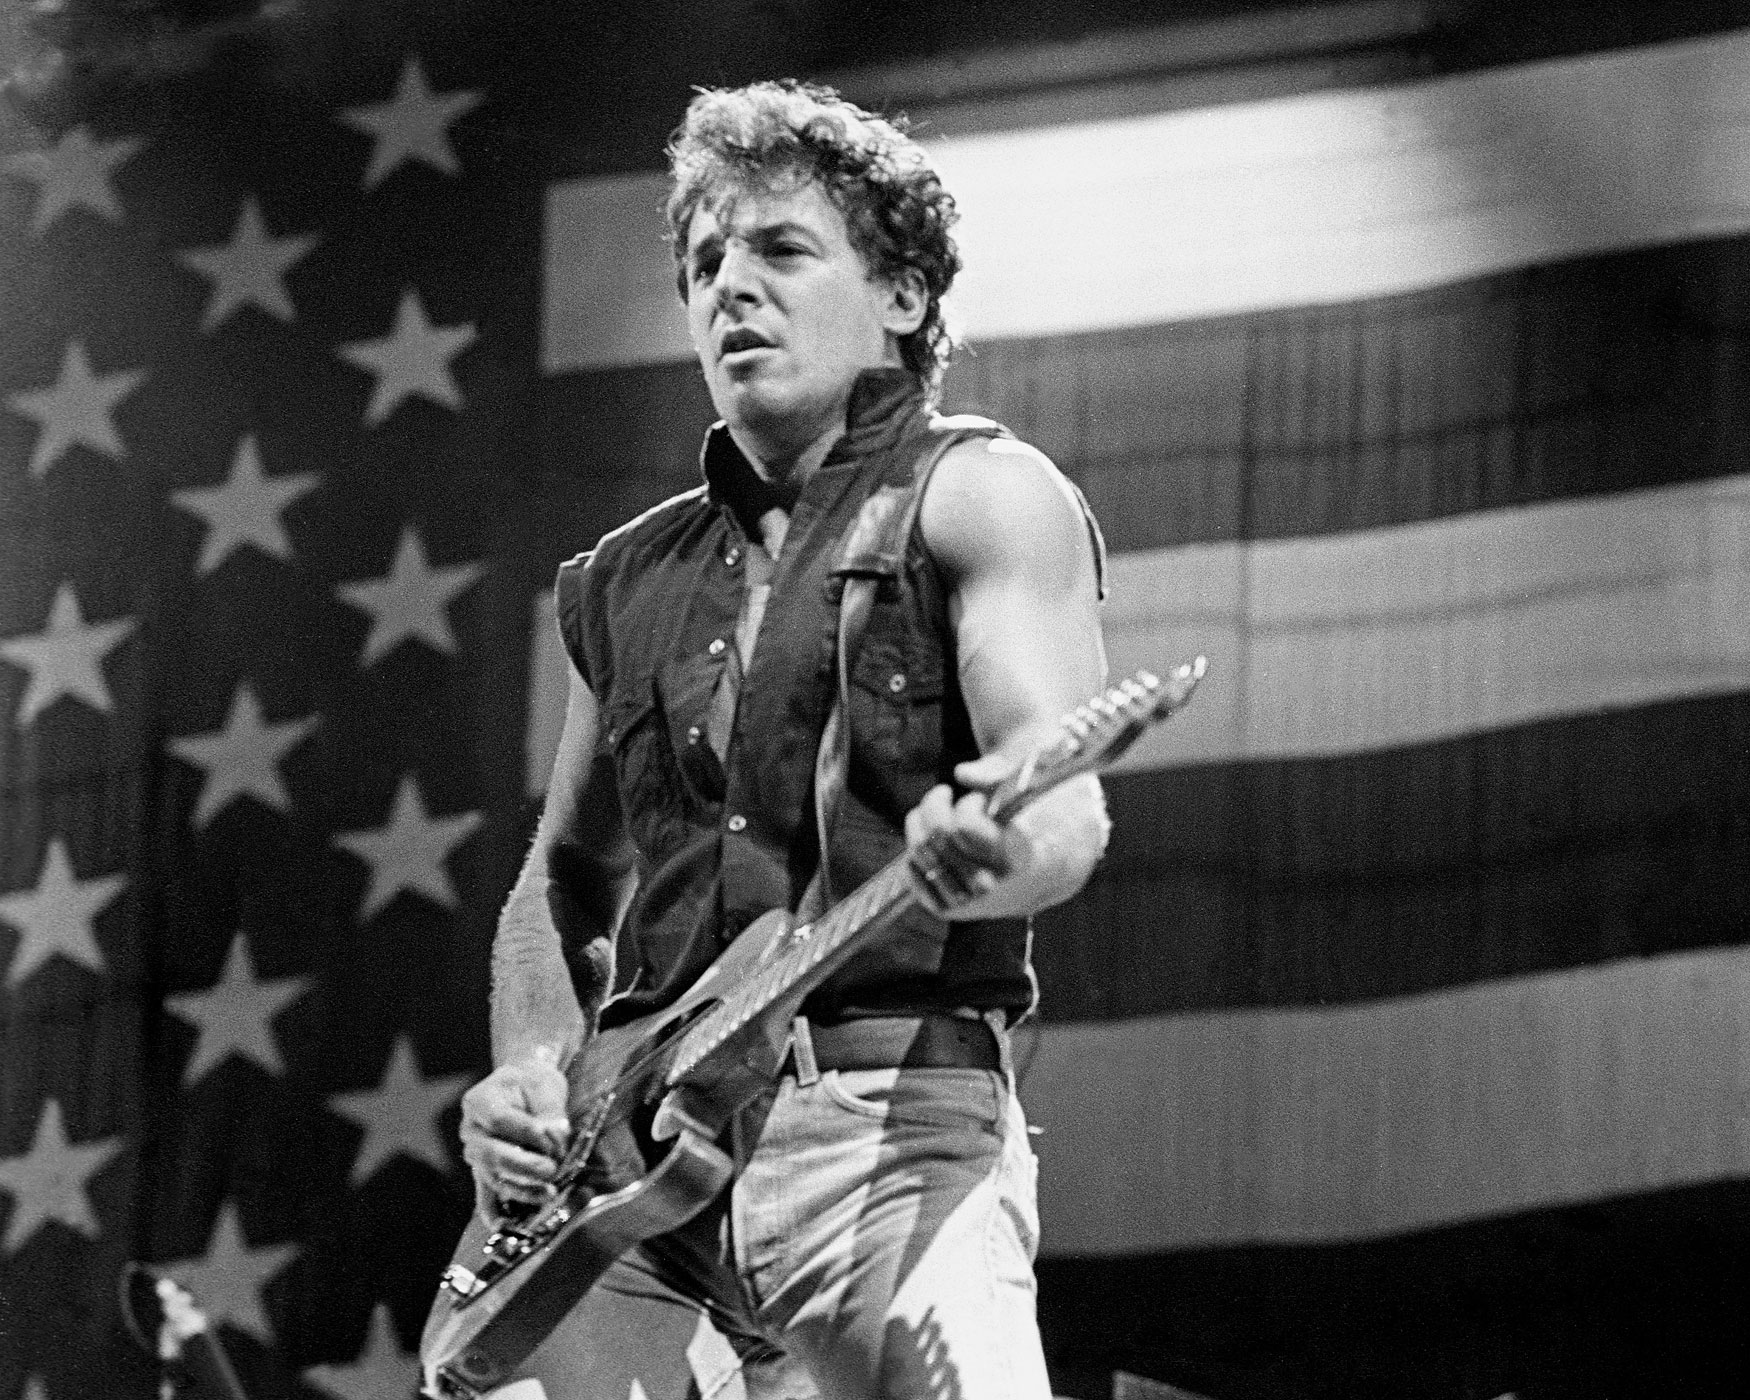 1984: 
                              When Born in the USA was released, Springsteen became a megastar on the strength of “Dancing in the Dark”, “Glory Days” and the album’s searing title track. Printed at the first CD pressing plant on U.S. soil, the album and its title track were frequently misinterpreted as jingoistic. President Ronald Reagan even tried to co-opt the track, not realizing it was about a disillusioned Vietnam vet. In his 1998 lyric anthology, Songs, Springsteen said, “Born In the U.S.A. changed my life.